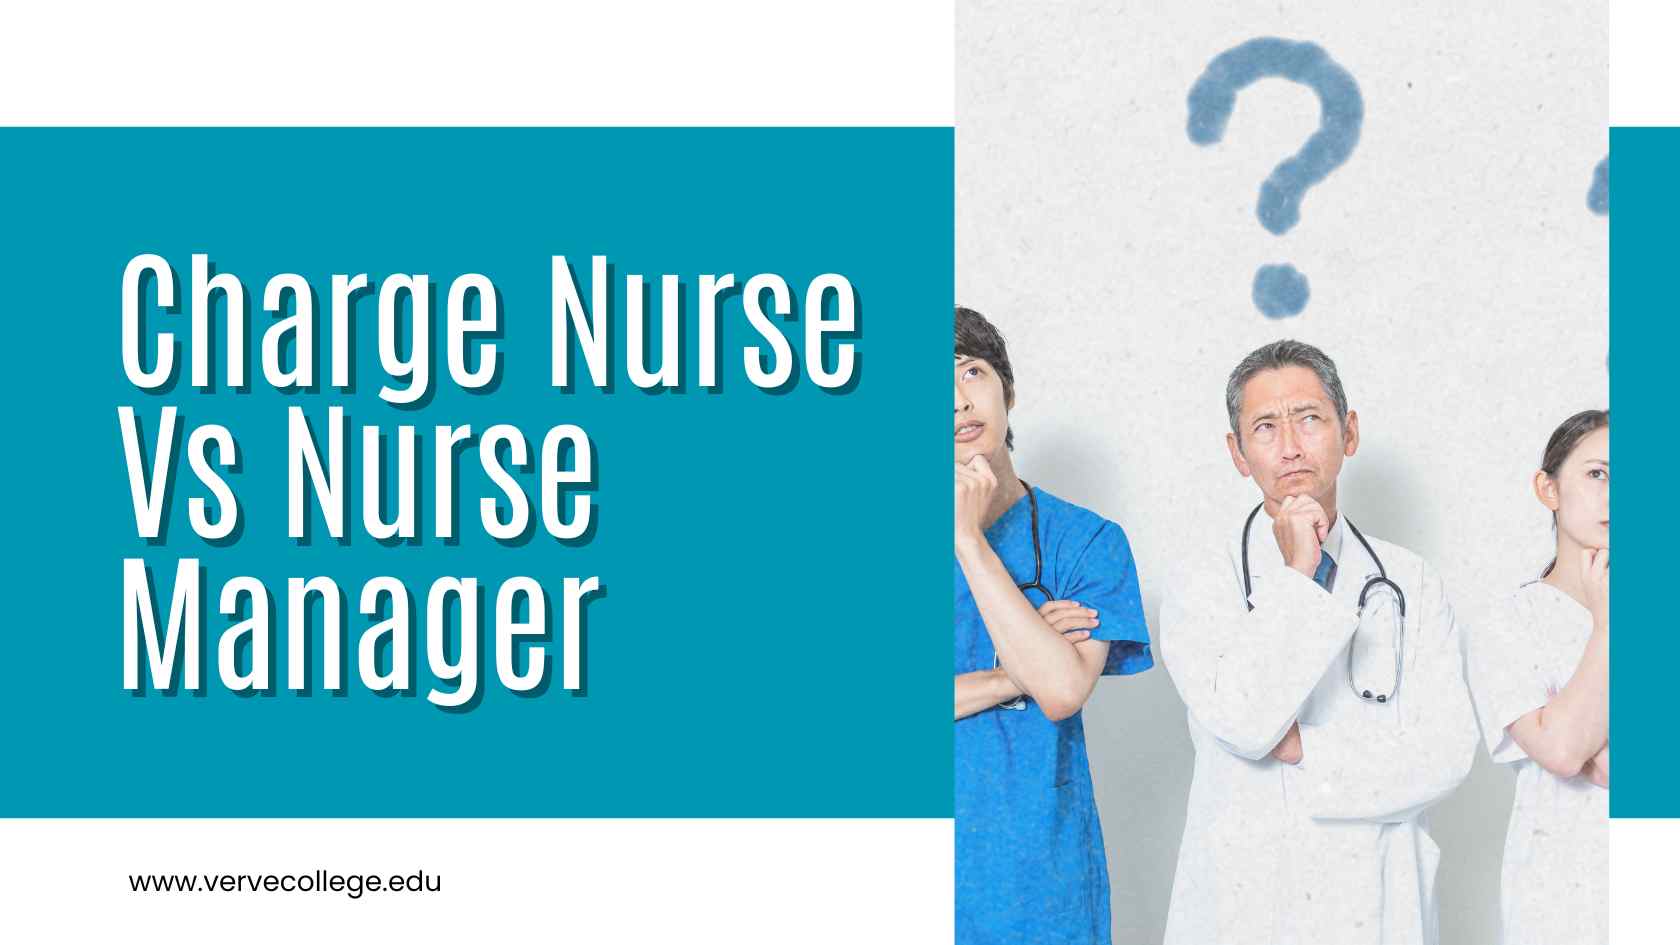 Major Difference Between Charge Nurse and Nurse Manager